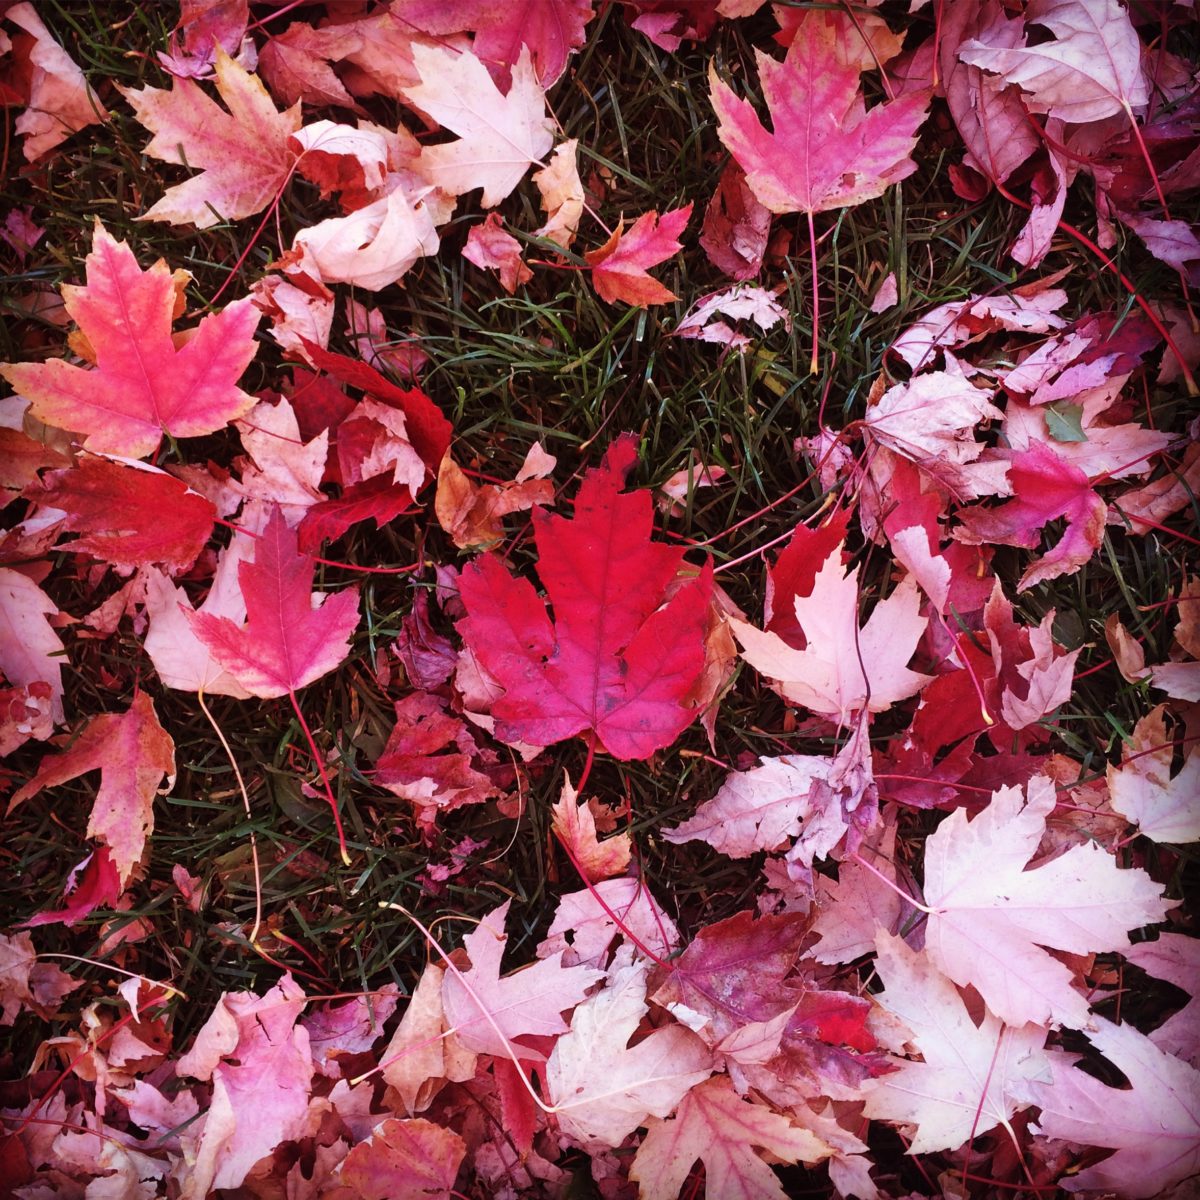 Red and pink autumn leaves on the ground with a poem about fighting impermanence. 